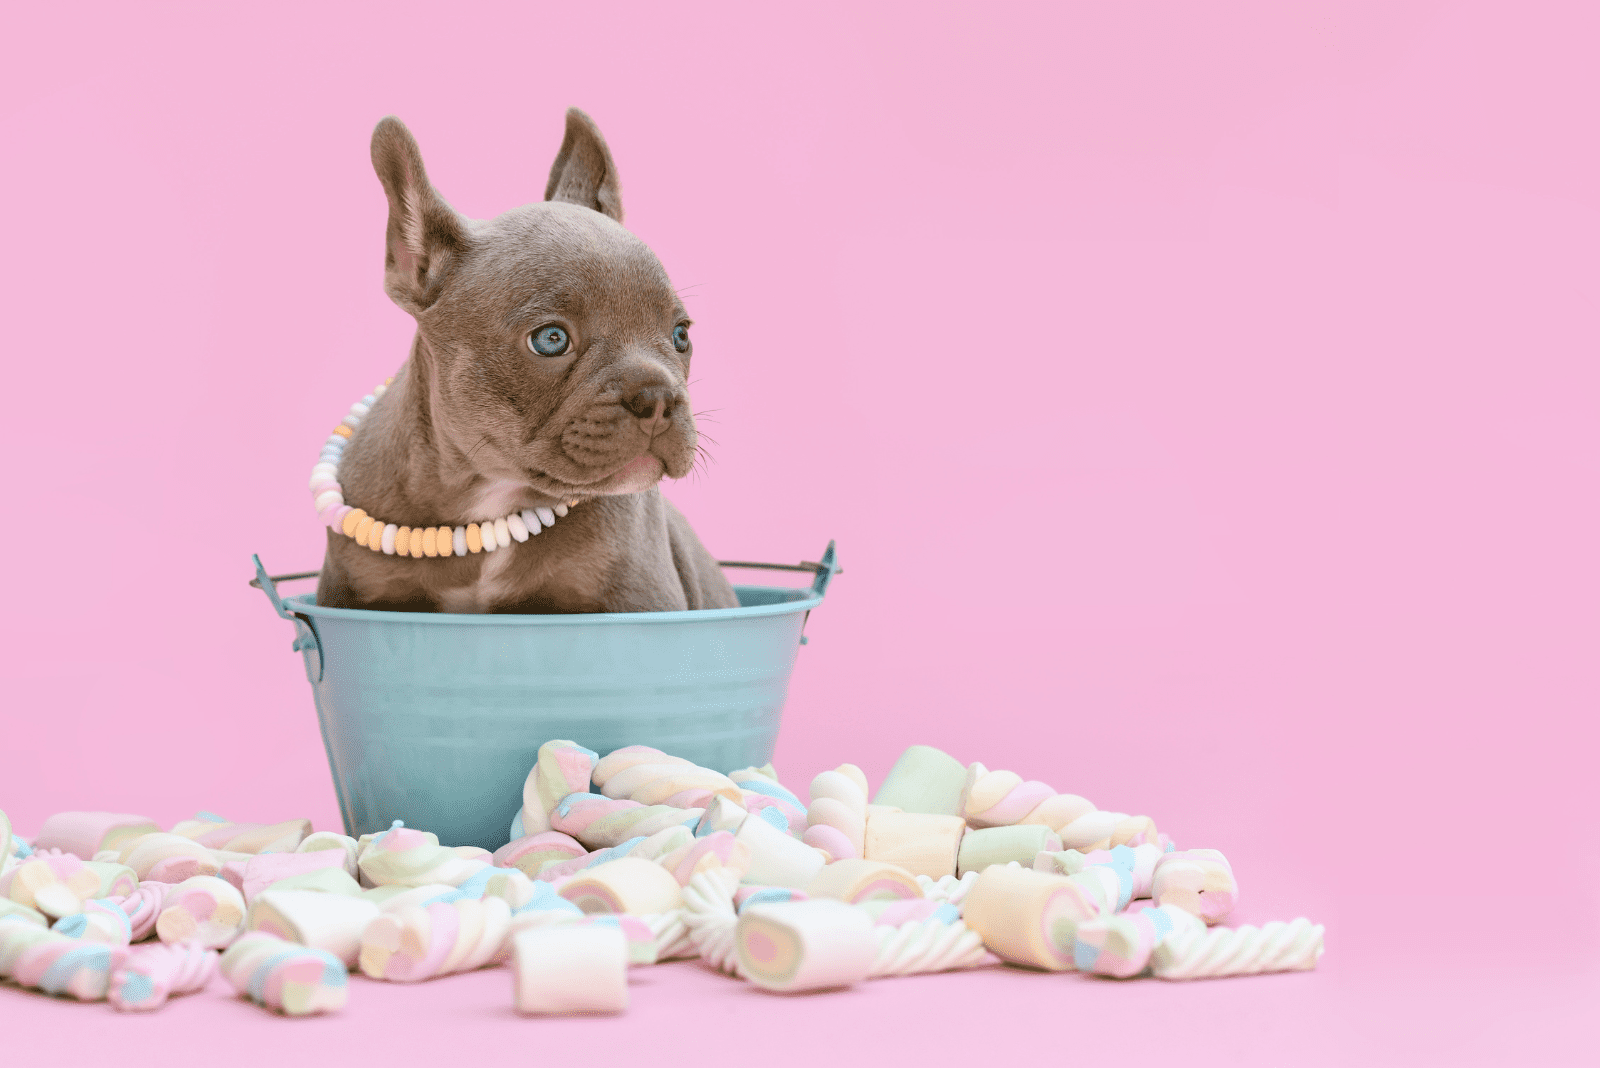 Isabella the French bulldog sits in a bucket